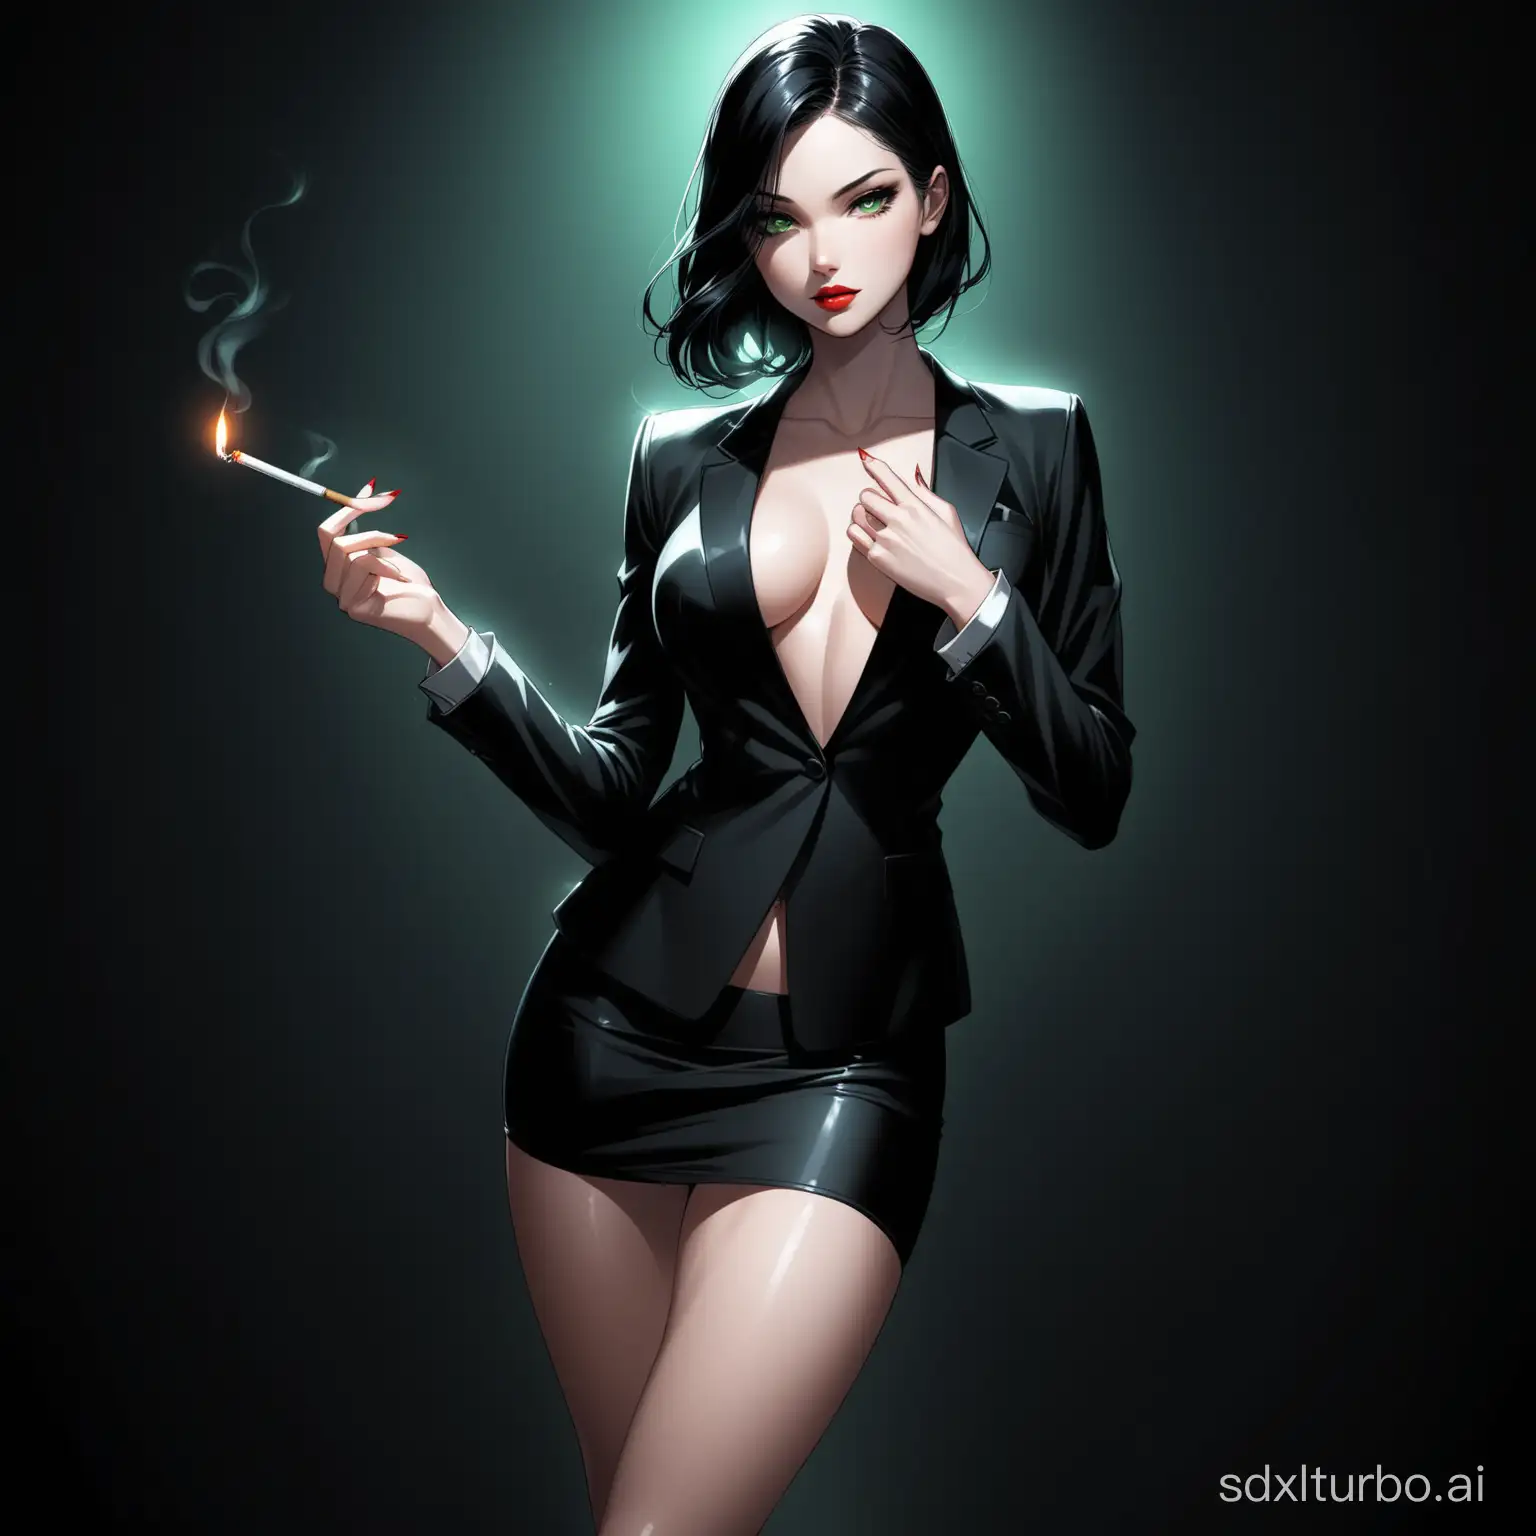 A full-body photo of an athletic and slender woman standing in a dark room, dressed in a black fitted suit that accentuates her curves. The short skirt reveals long and toned legs, while black hair cascades down her back. Bright green eyes and red-painted lips stand out against pale skin. A lit cigarette in one hand and a shiny object in the other, this figure's seductive and confident pose exudes dangerous elegance, with a dark and shadowy background that highlights her figure